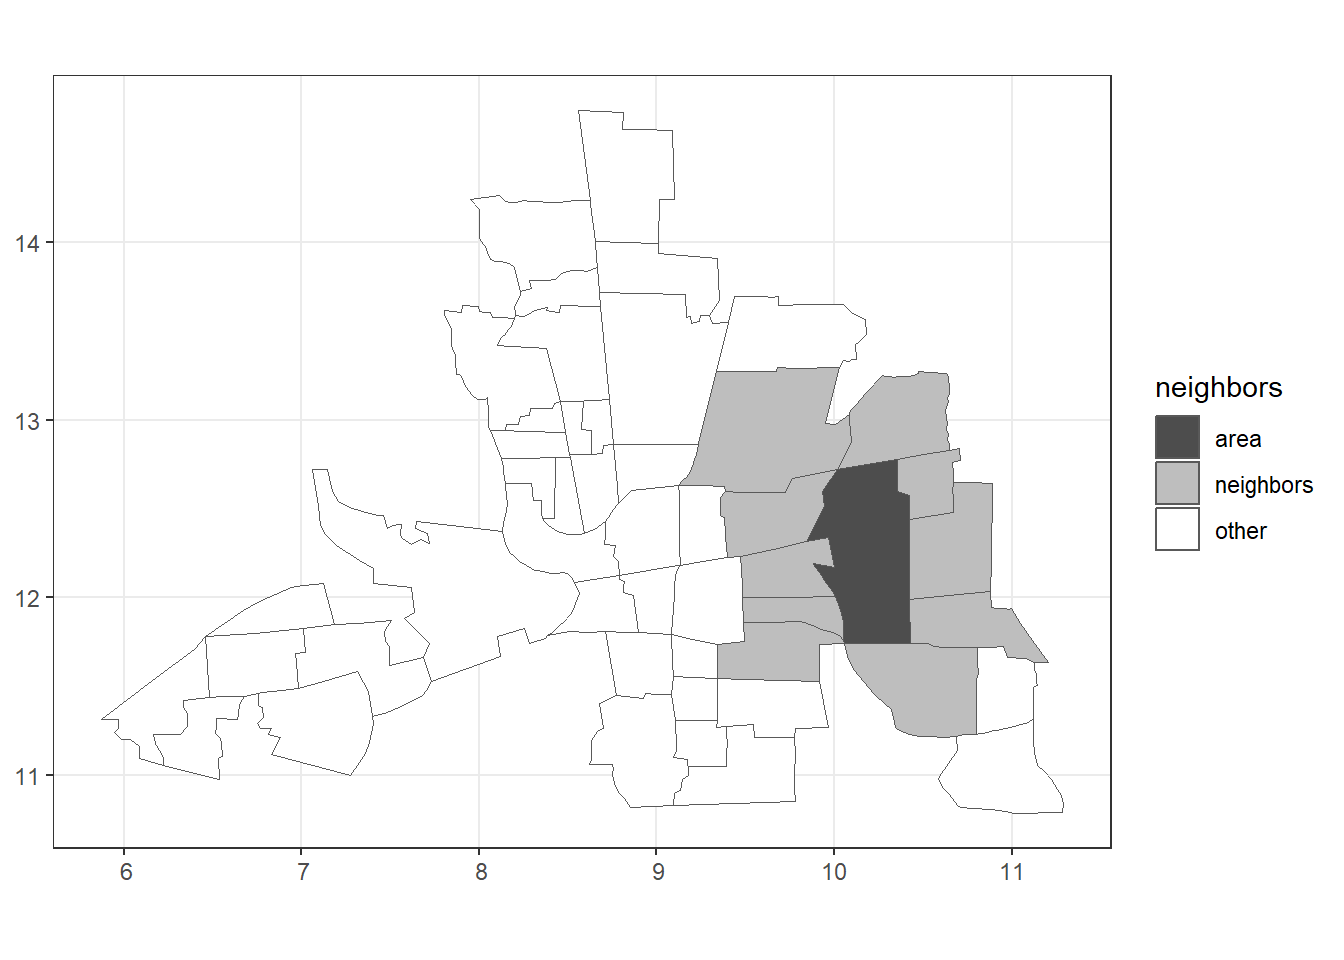 Left: Map of neighbors based on contiguity. Right: Map of neighbors of area 20 based on contiguity.